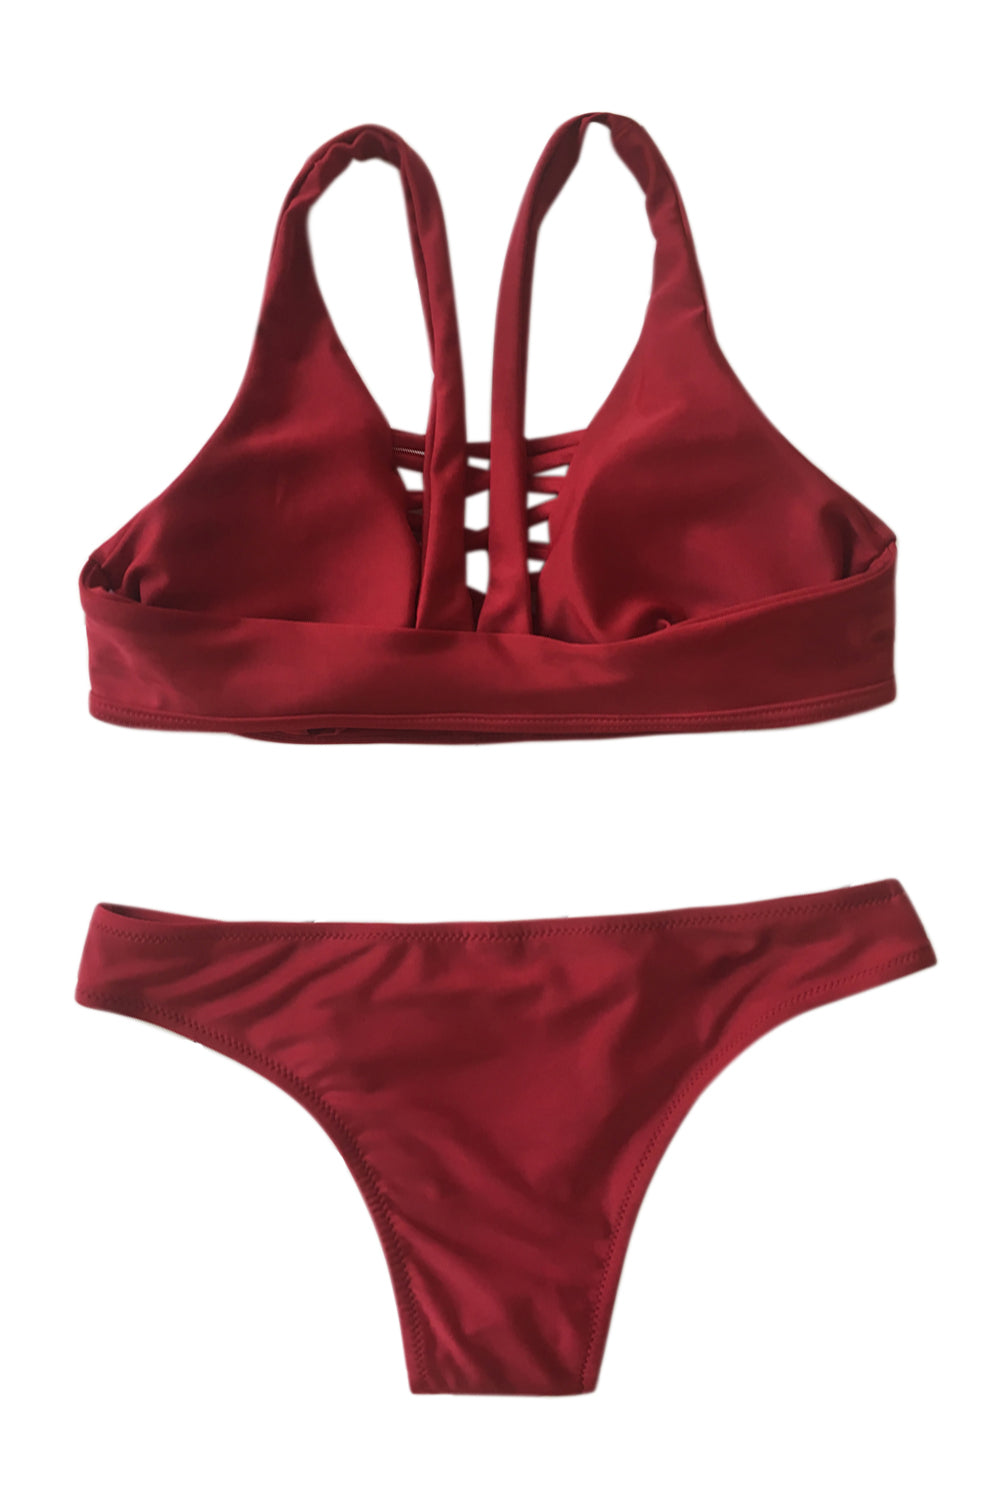 Iyasson Red Solid Color Sexy Front Cross Bikini Set